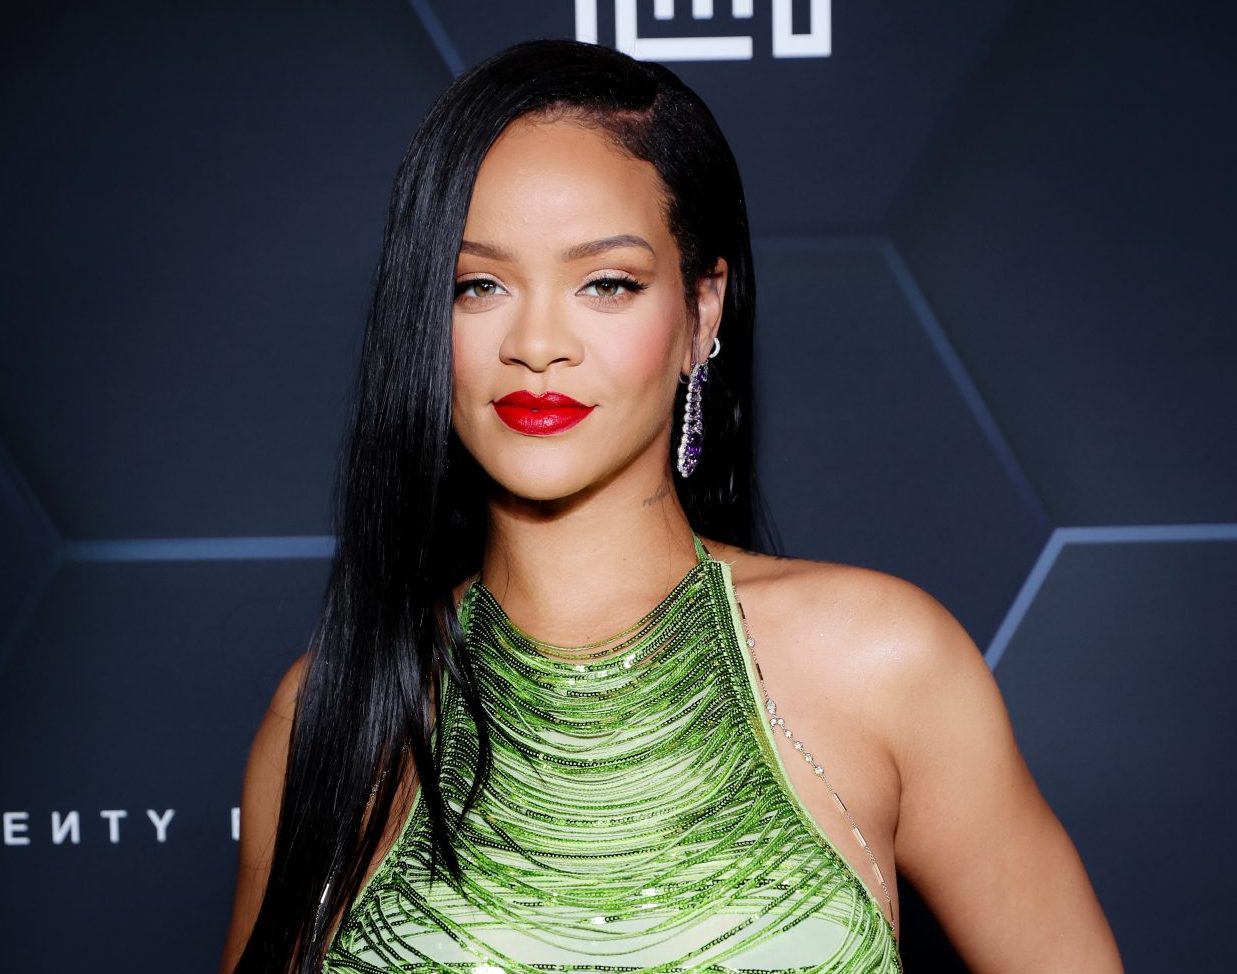 Rihanna Radiates In All Black For Rare Solo Appearance At London Art Exhibition